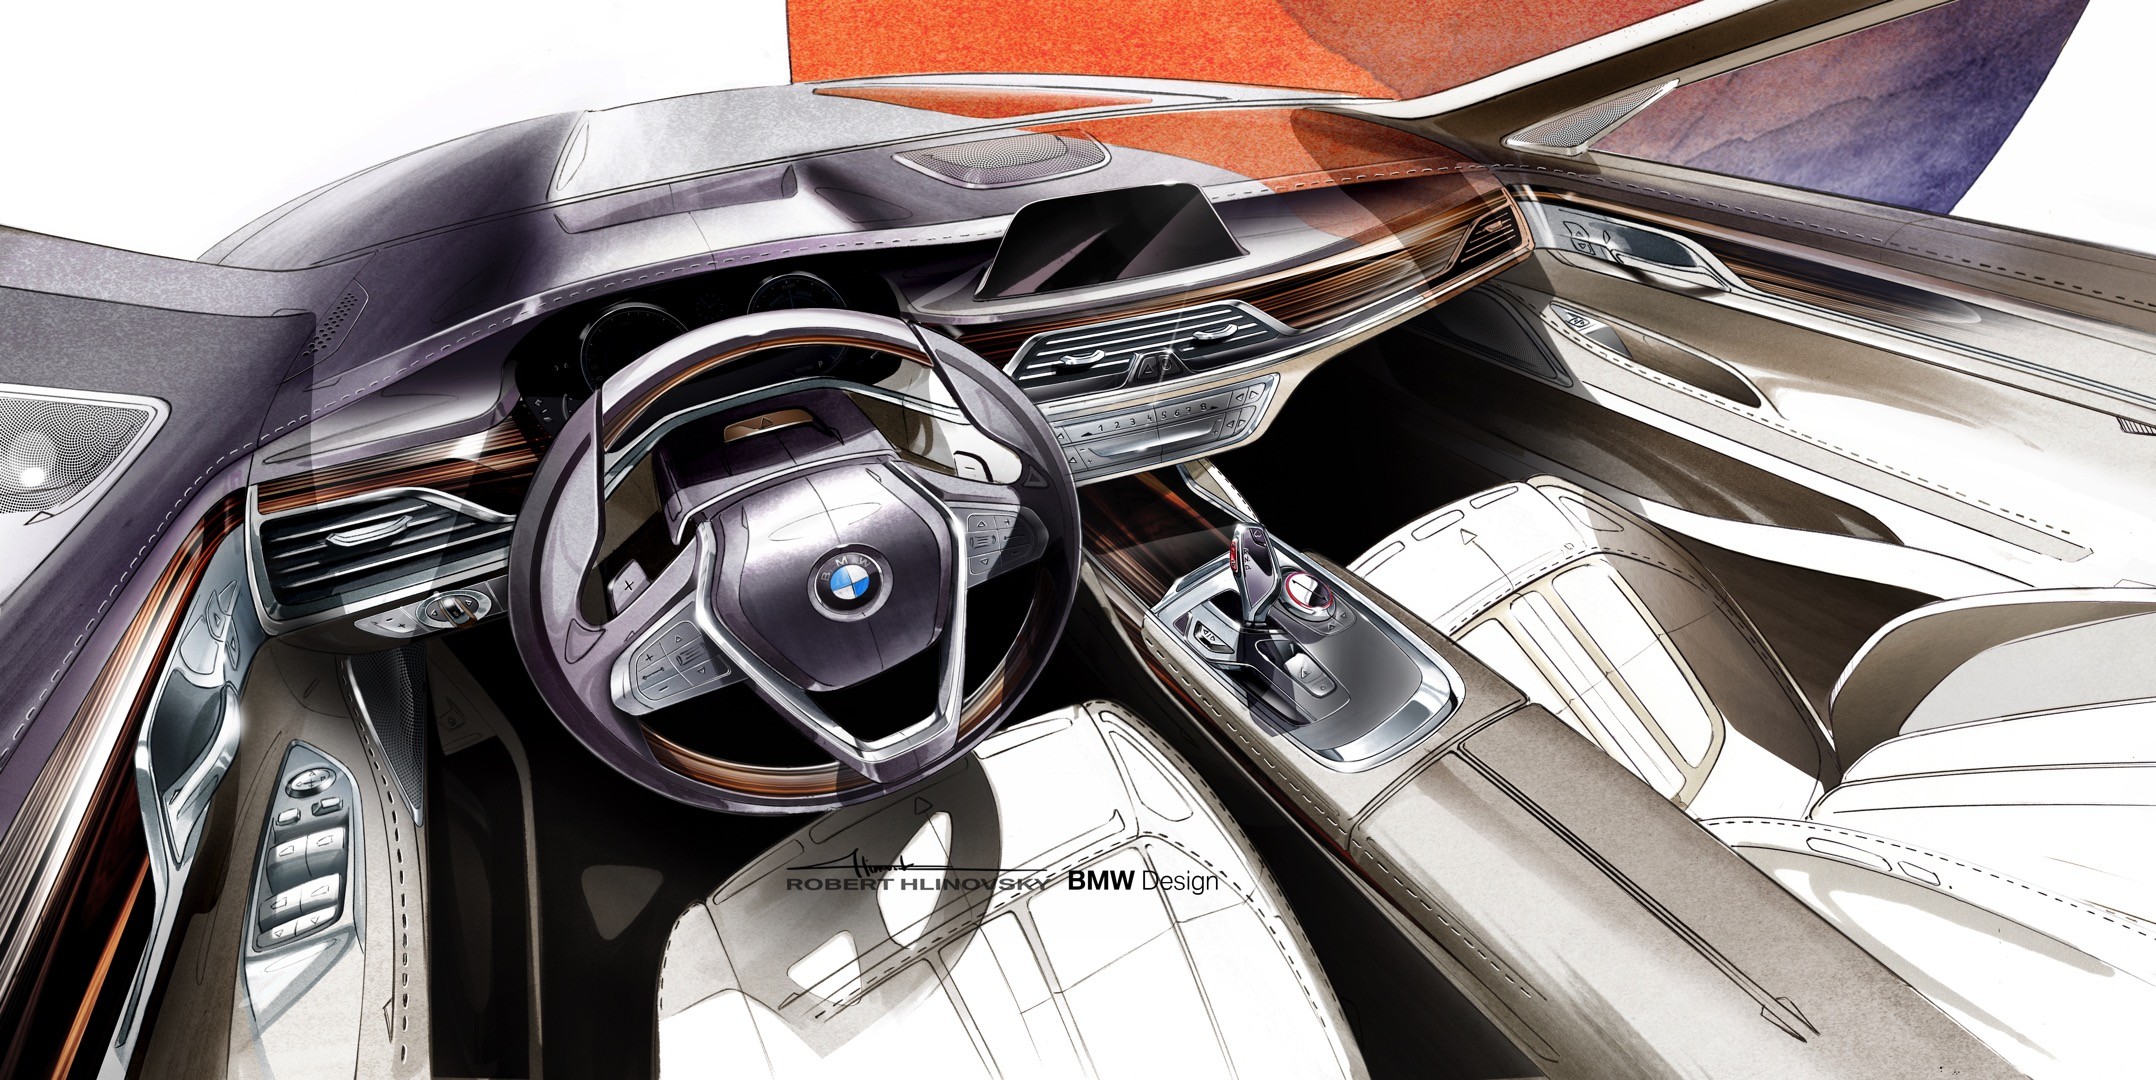 2016-bmw-7-series-finally-officially-unveiled-the-good-stuffs-inside-photo-gallery_84